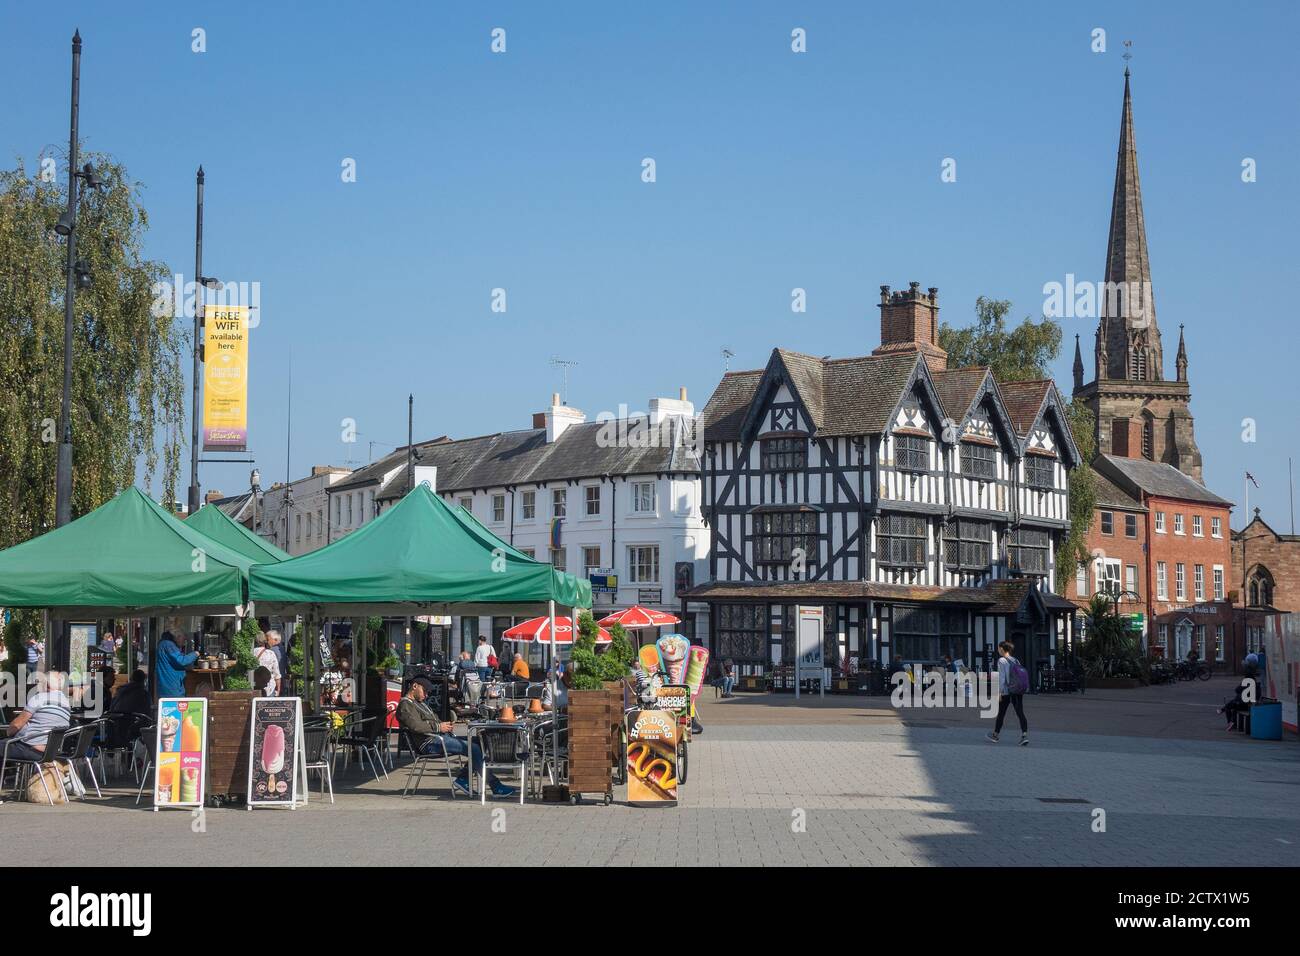 England, Herefordshire, Hereford, High town market Stock Photo